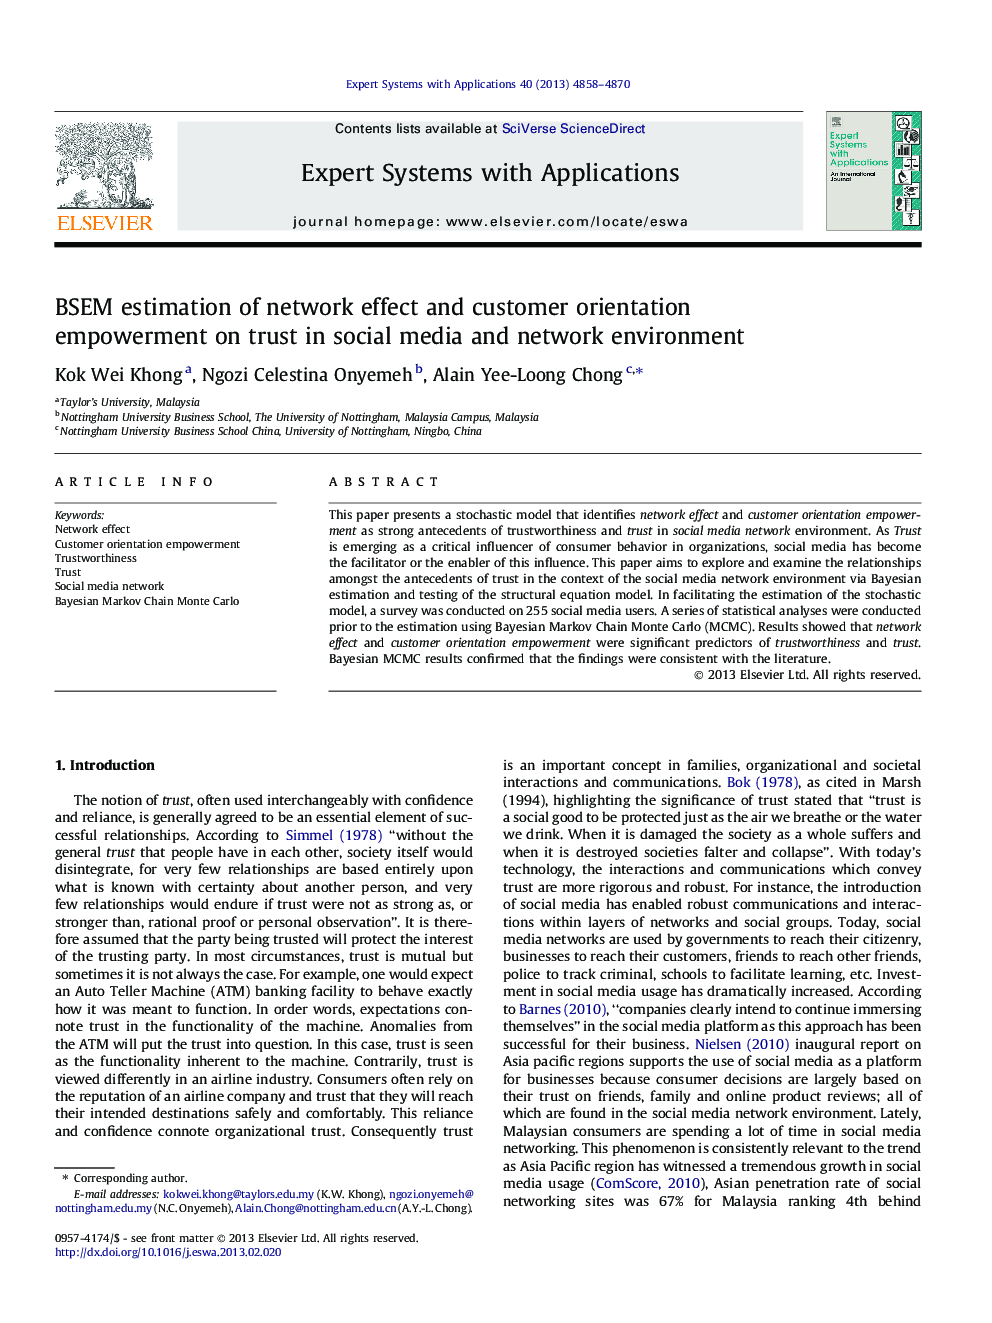 BSEM estimation of network effect and customer orientation empowerment on trust in social media and network environment